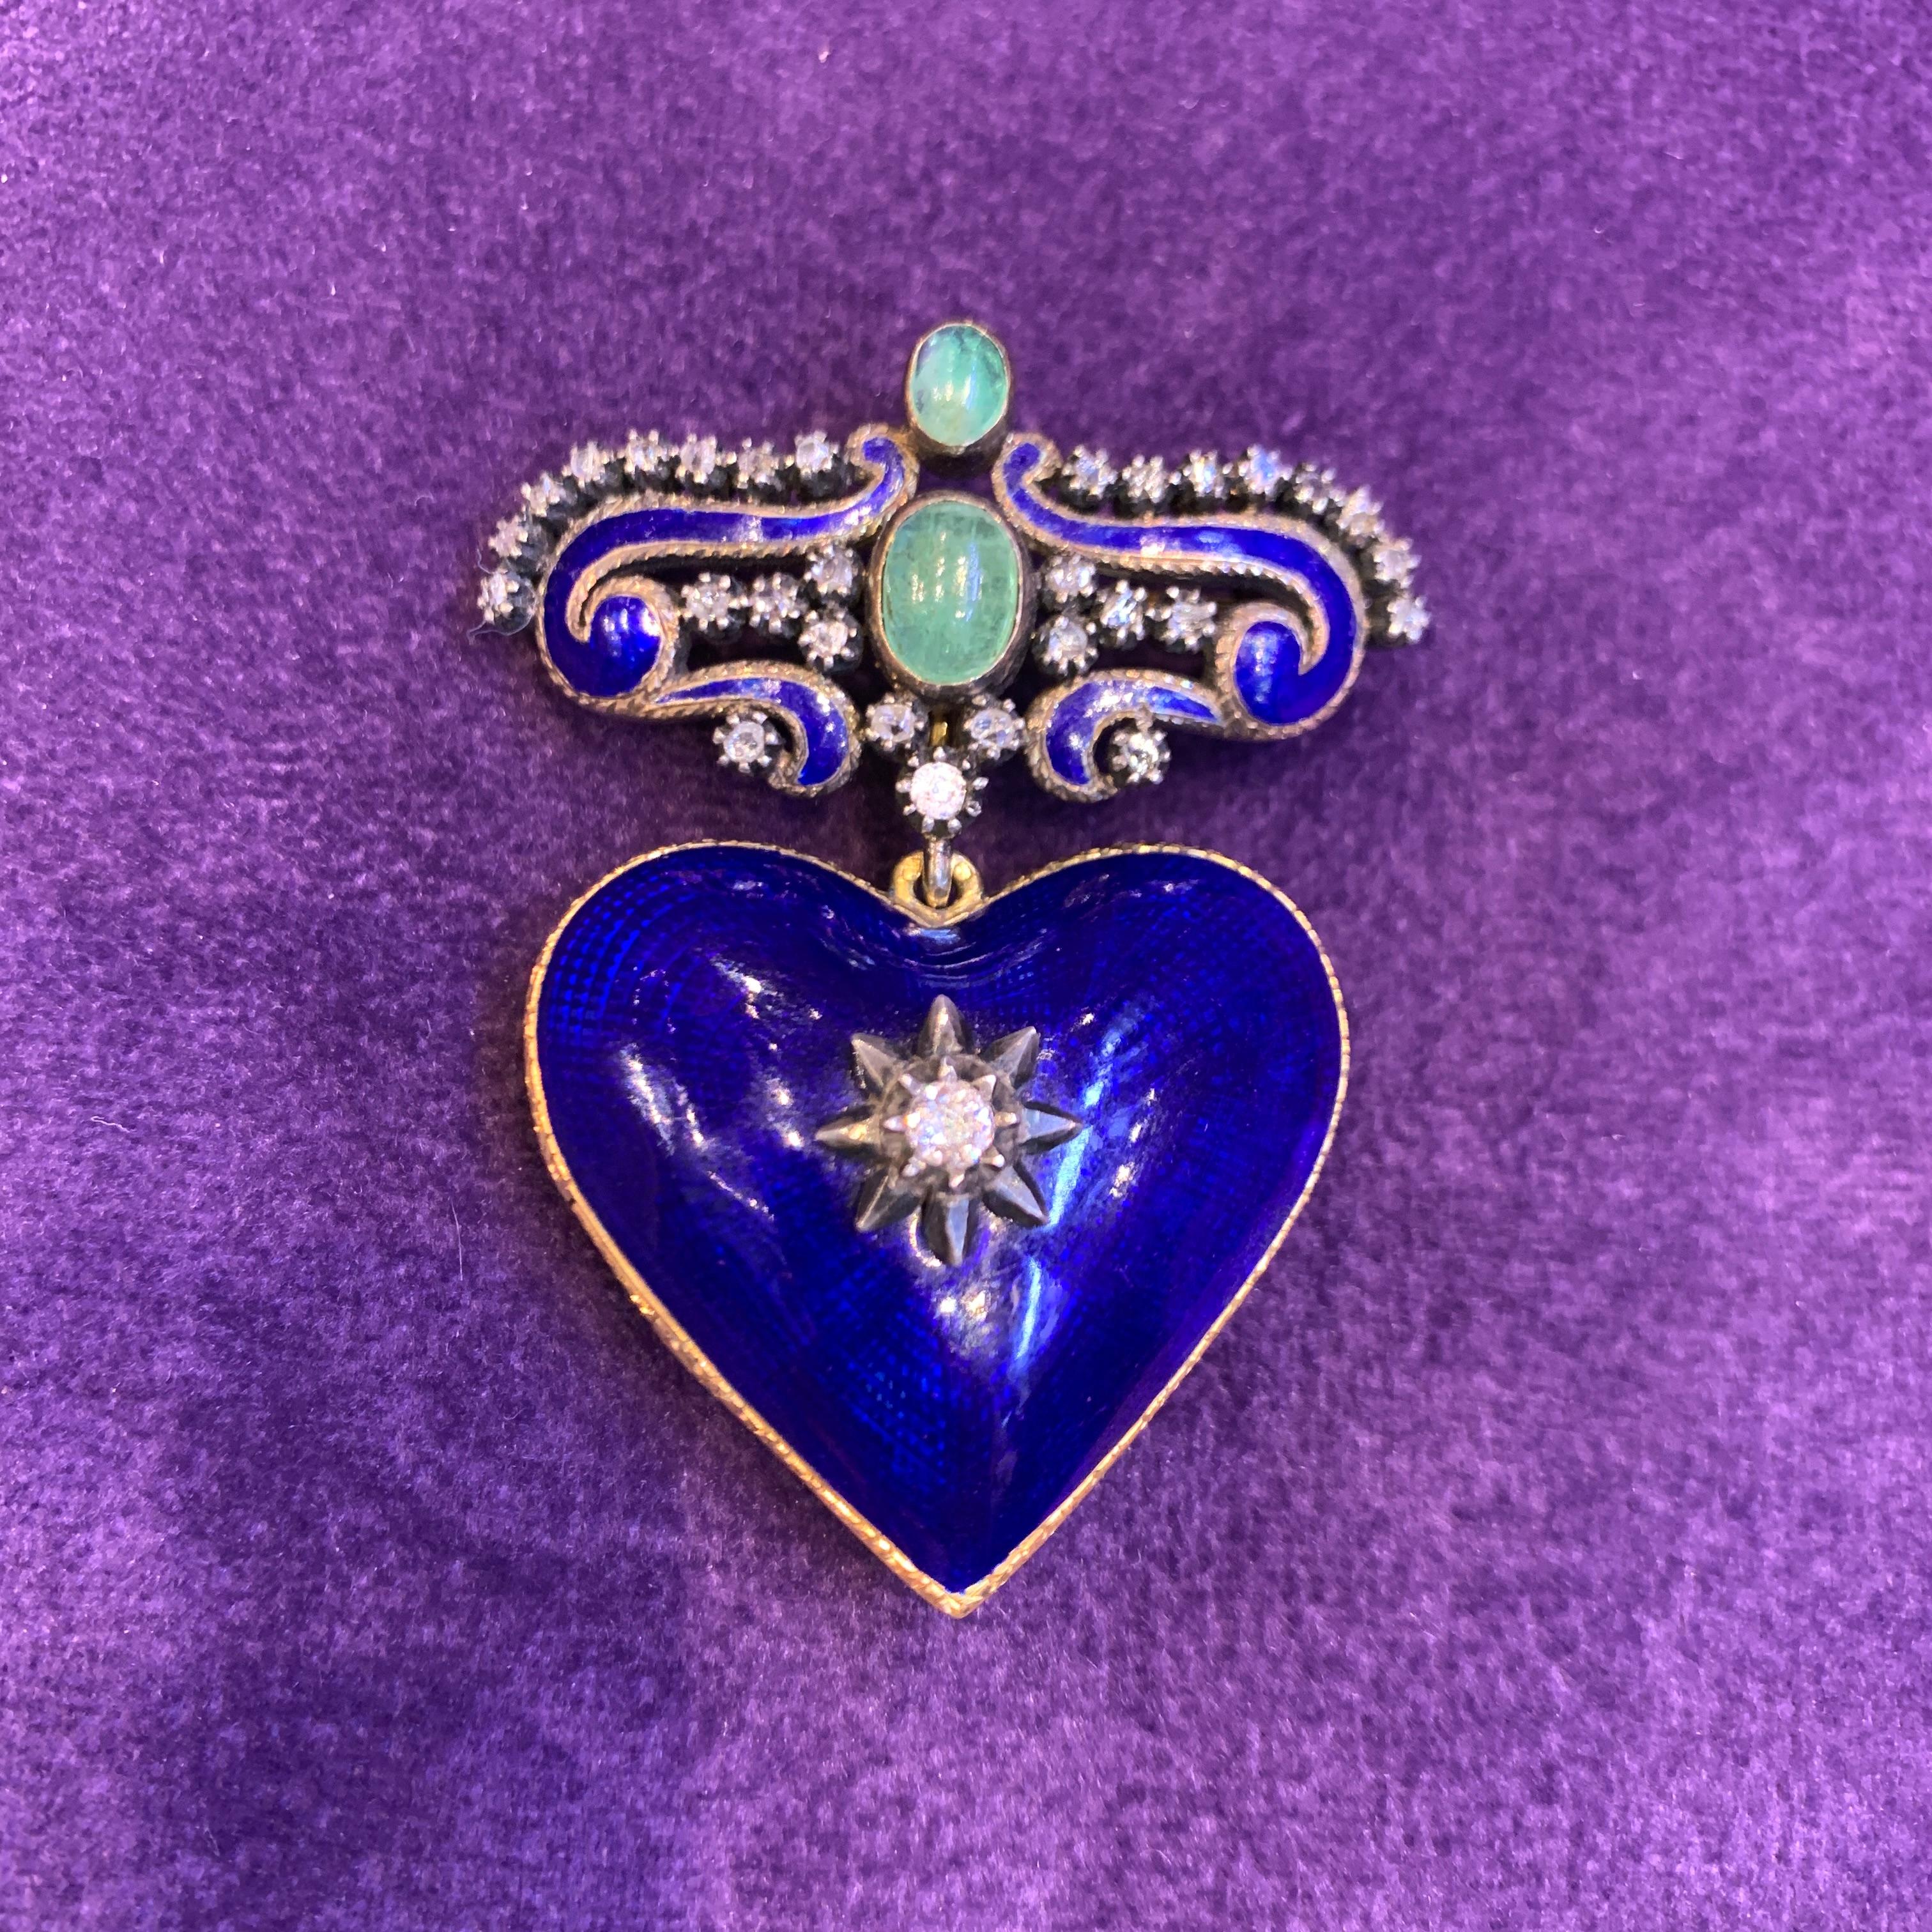 Antique Enamel Heart Shaped Locket Brooch In Excellent Condition For Sale In New York, NY